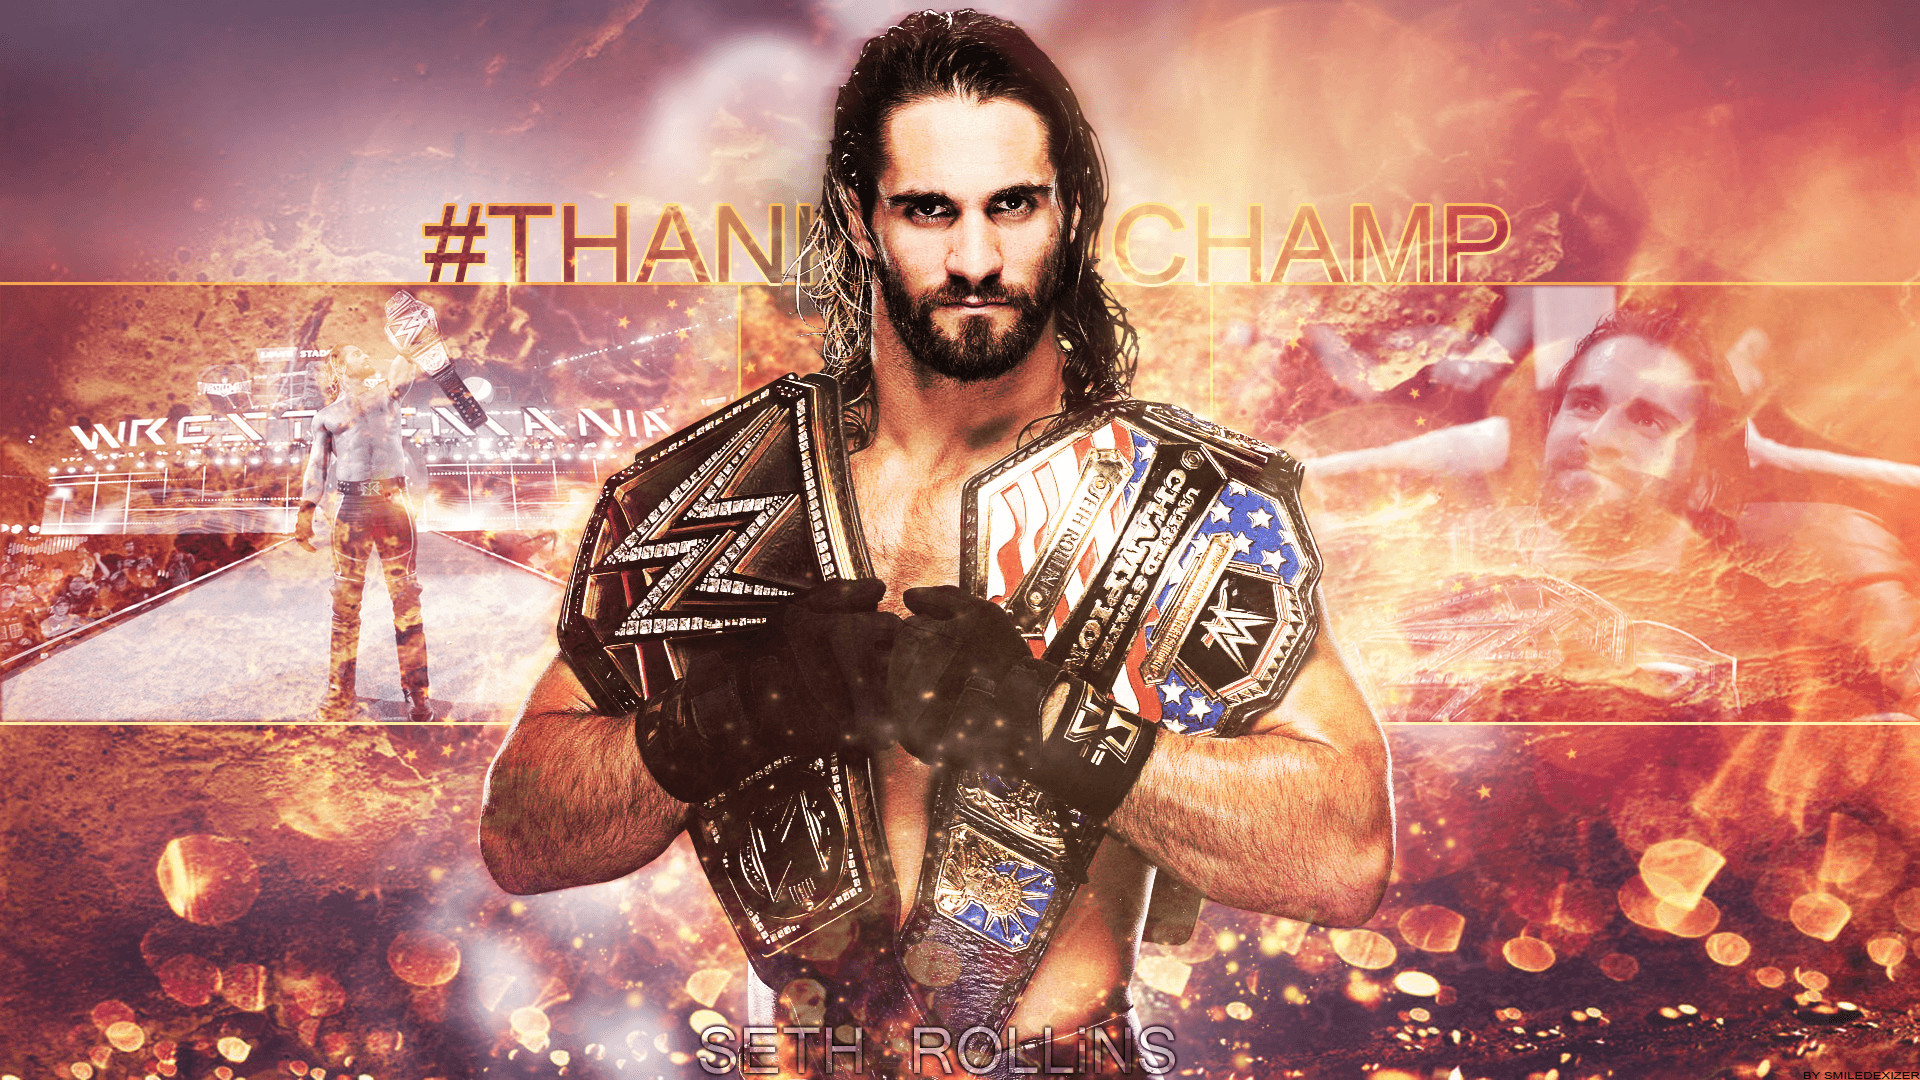 Seth Rollins HD Wallpapers – HD Wallpapers Backgrounds of Your Choice